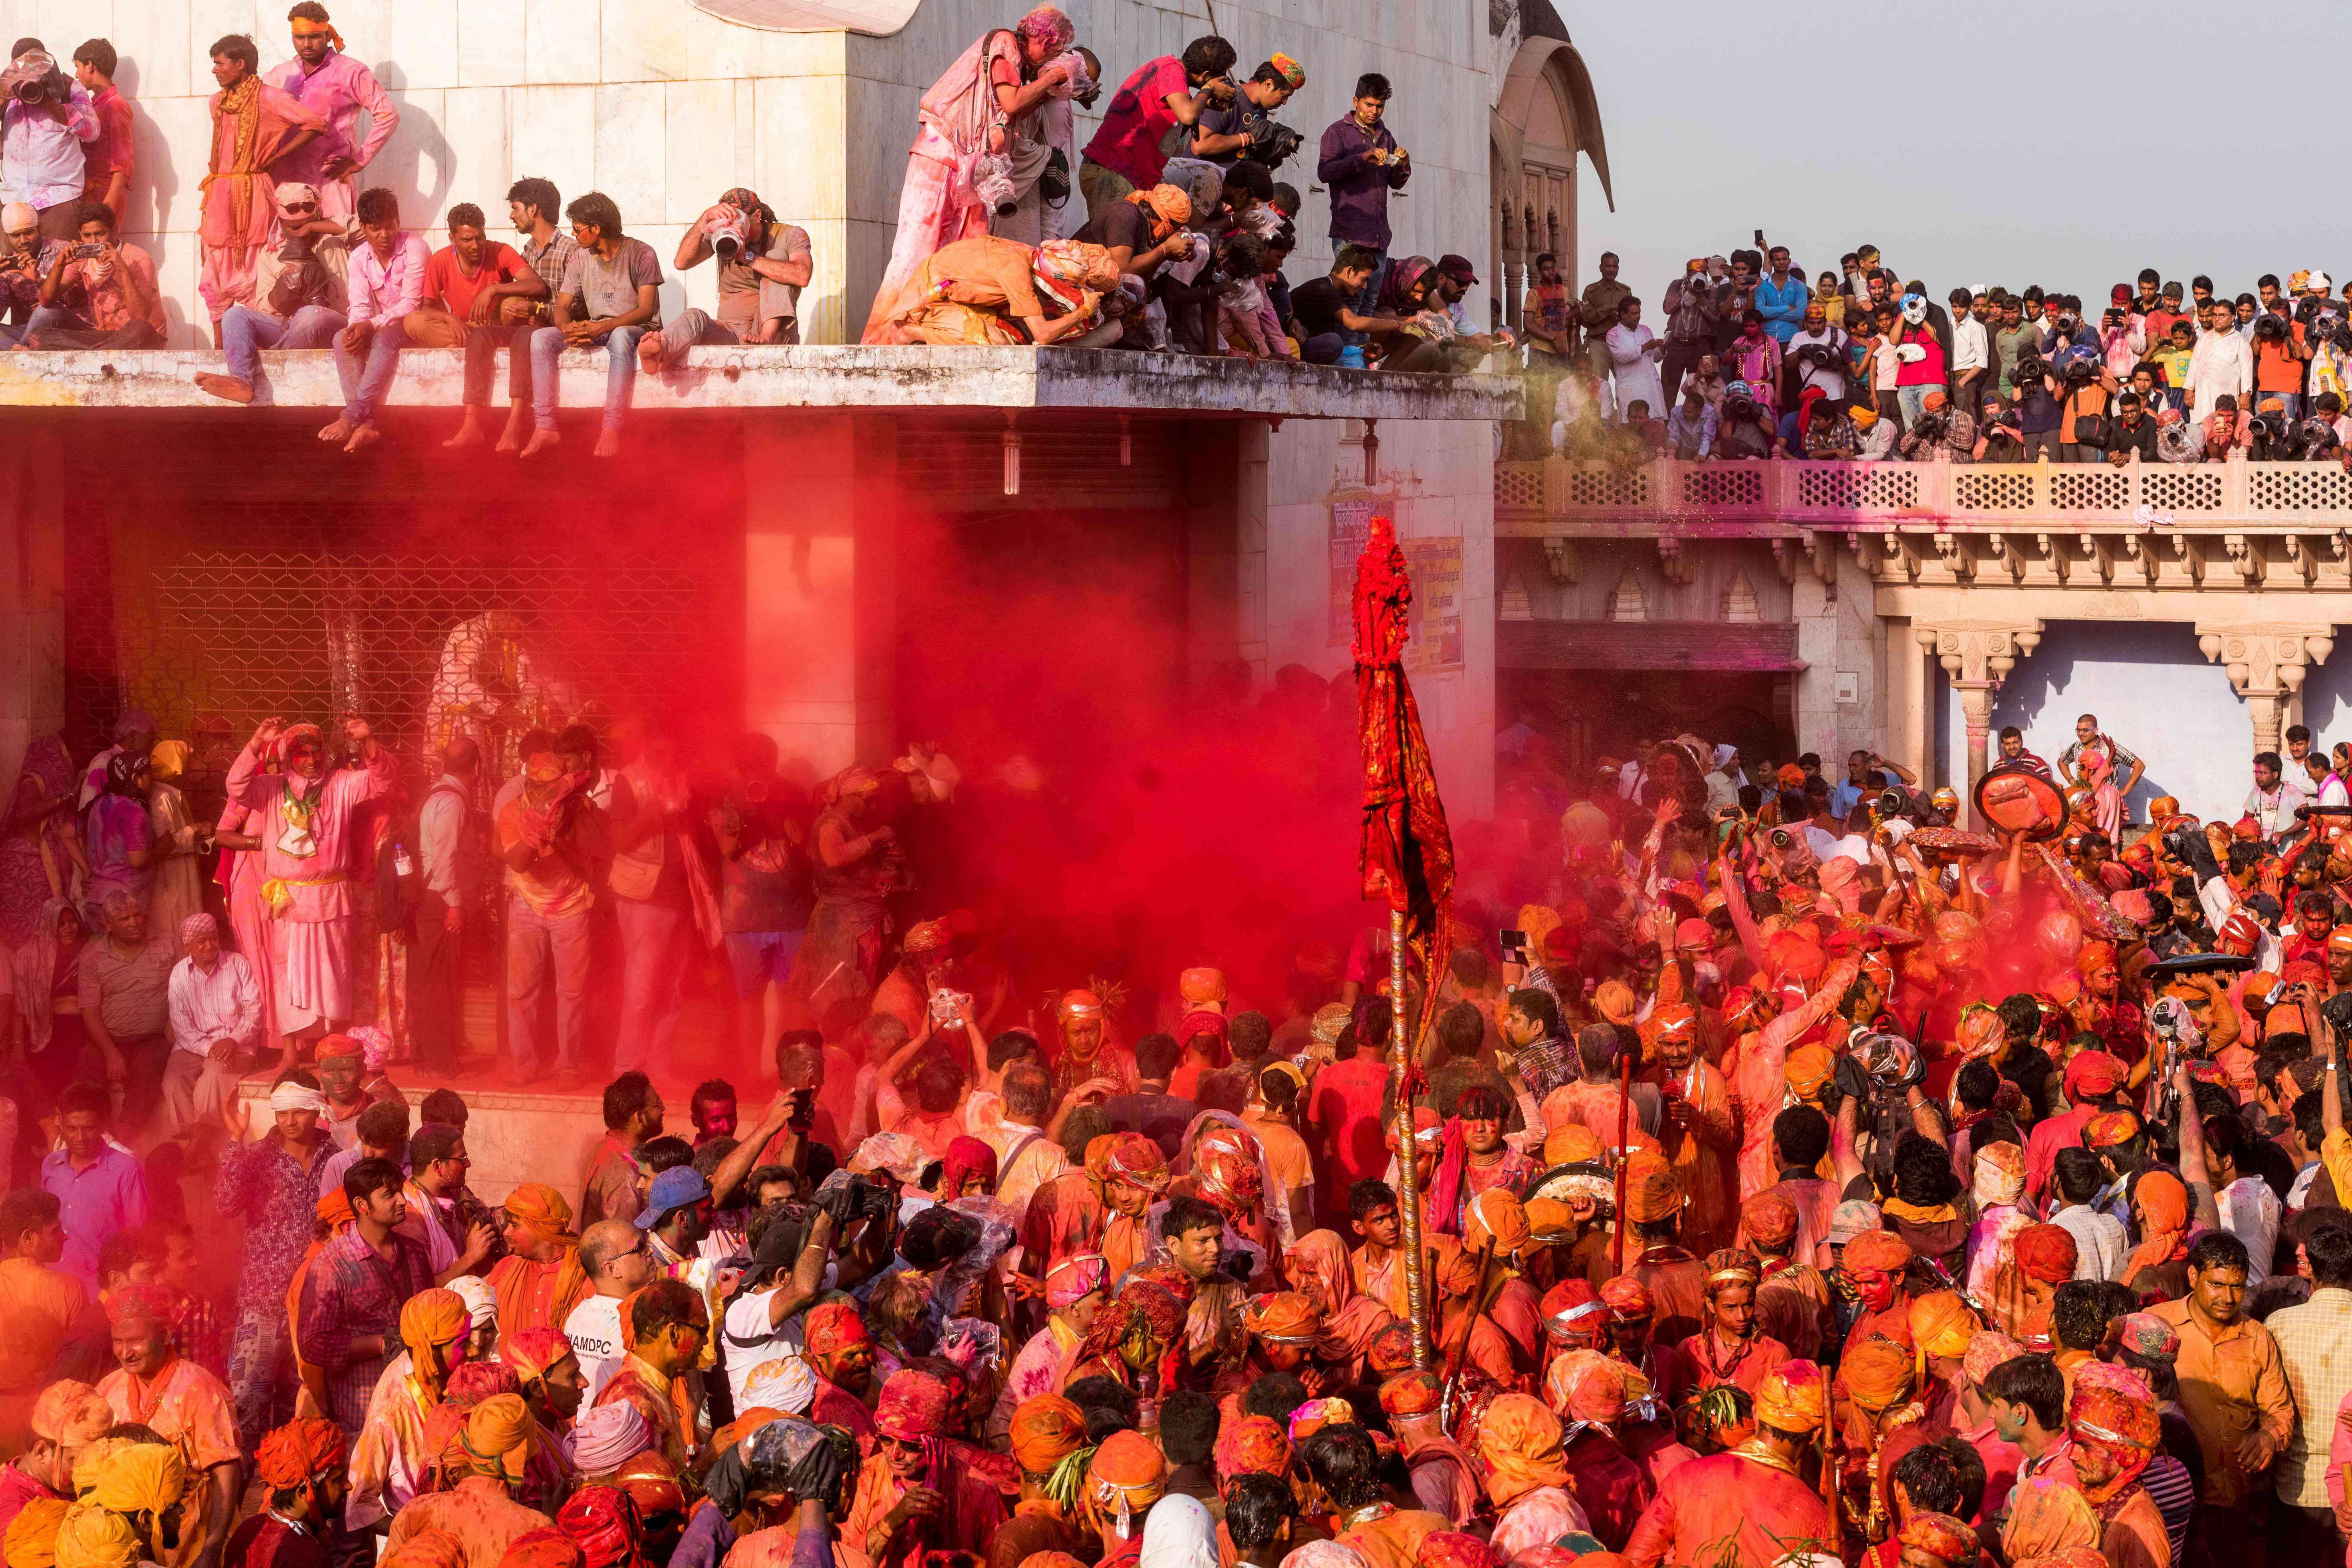 Indian revellers throw red coloured powder onto villagers who are being sprayed with water  during the Lathmar Holi celebrations in the village of Nandgaon on March 18, 2016. holi, also called the Festival of Colours, is a popular Hindu spring festival observed in India at the end of the winter season on the last full moon day of the lunar month. / AFP PHOTO / Francois Xavier MARIT